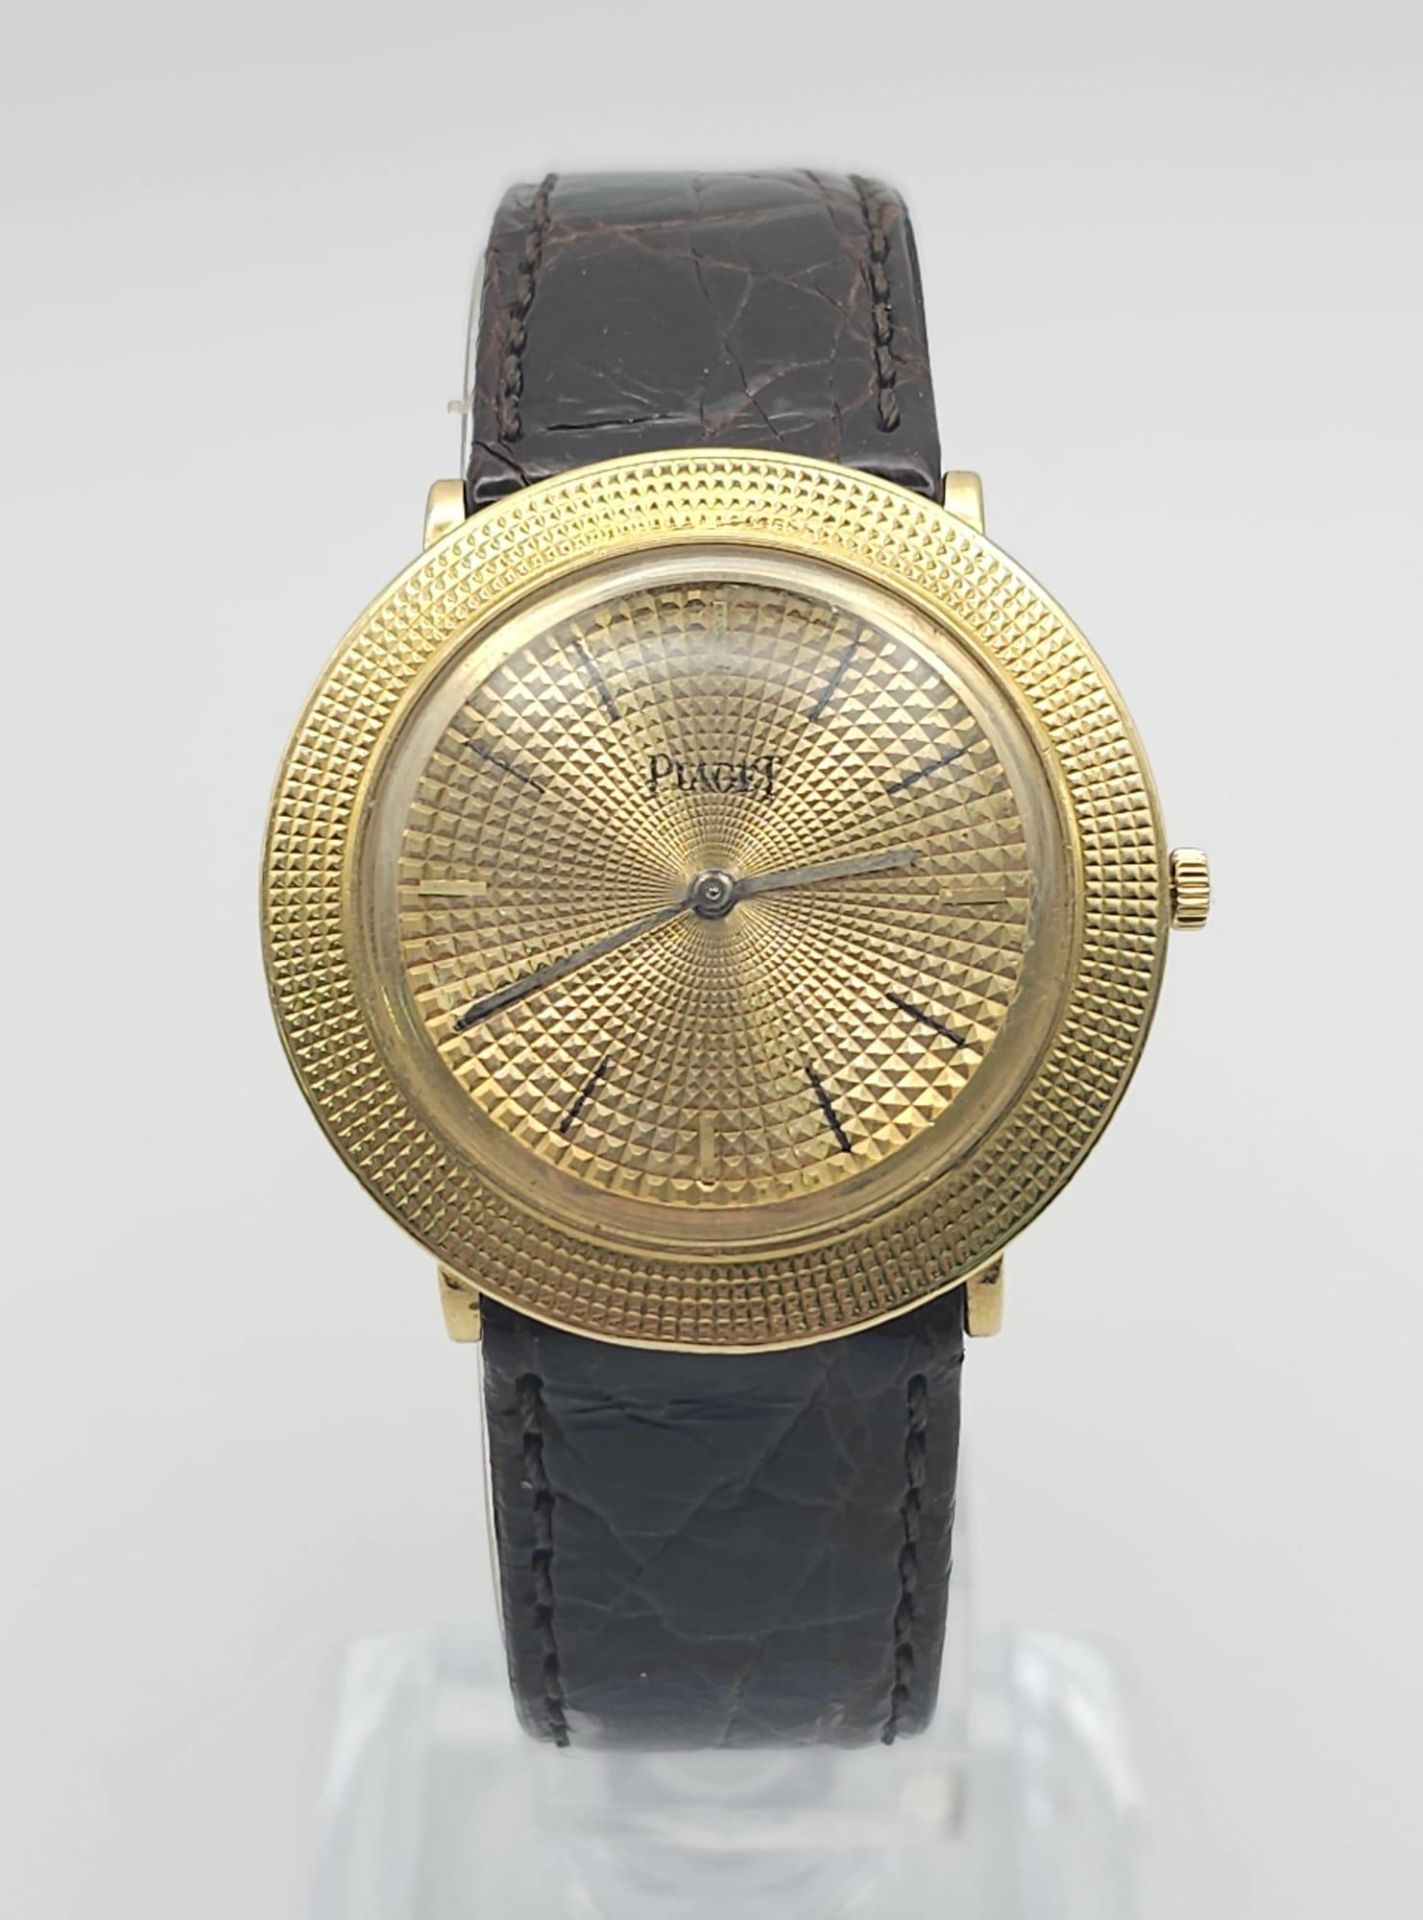 A Vintage 18K Gold Piaget Gents Watch with Hypnotic Dial. Brown crocodile strap. 18k gold case - - Image 3 of 25